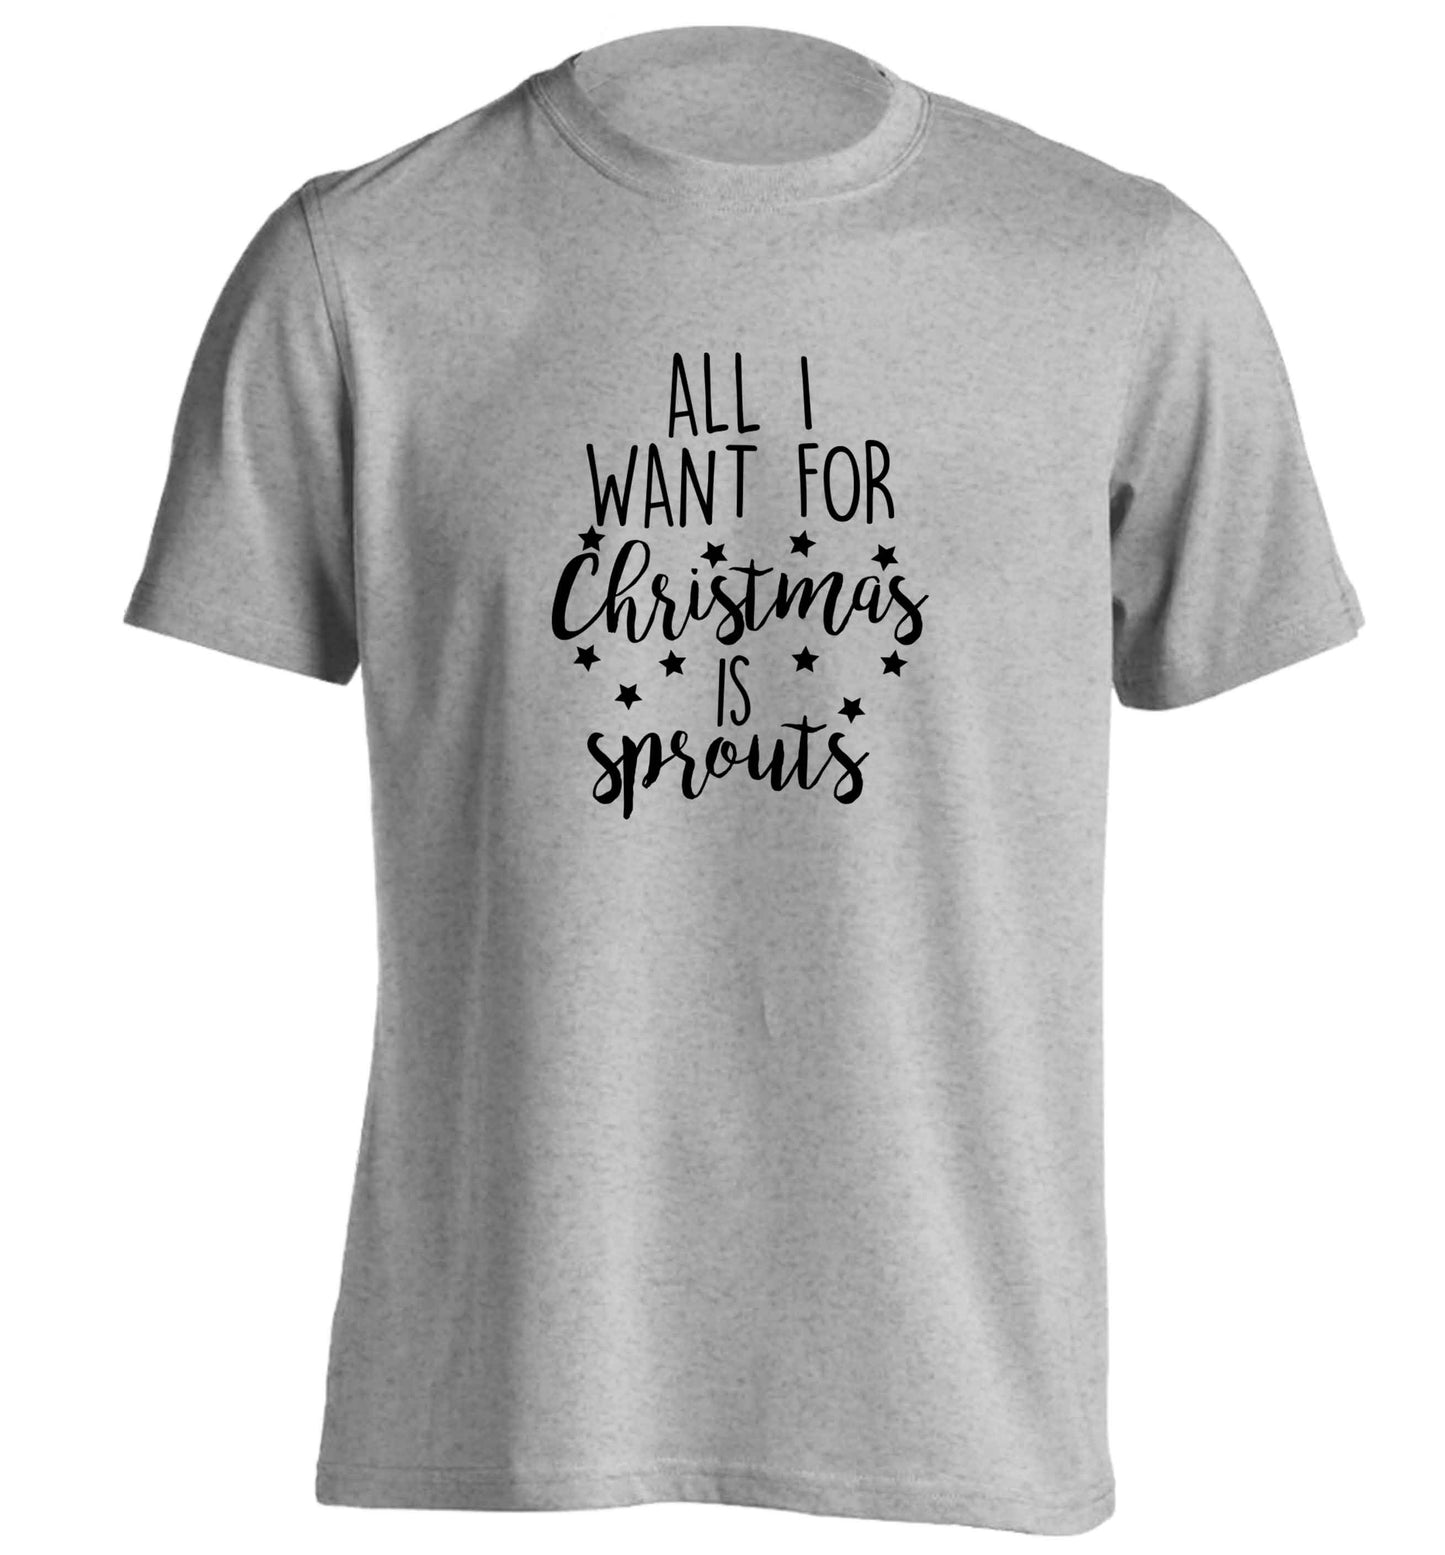 All I want for Christmas is sprouts adults unisex grey Tshirt 2XL